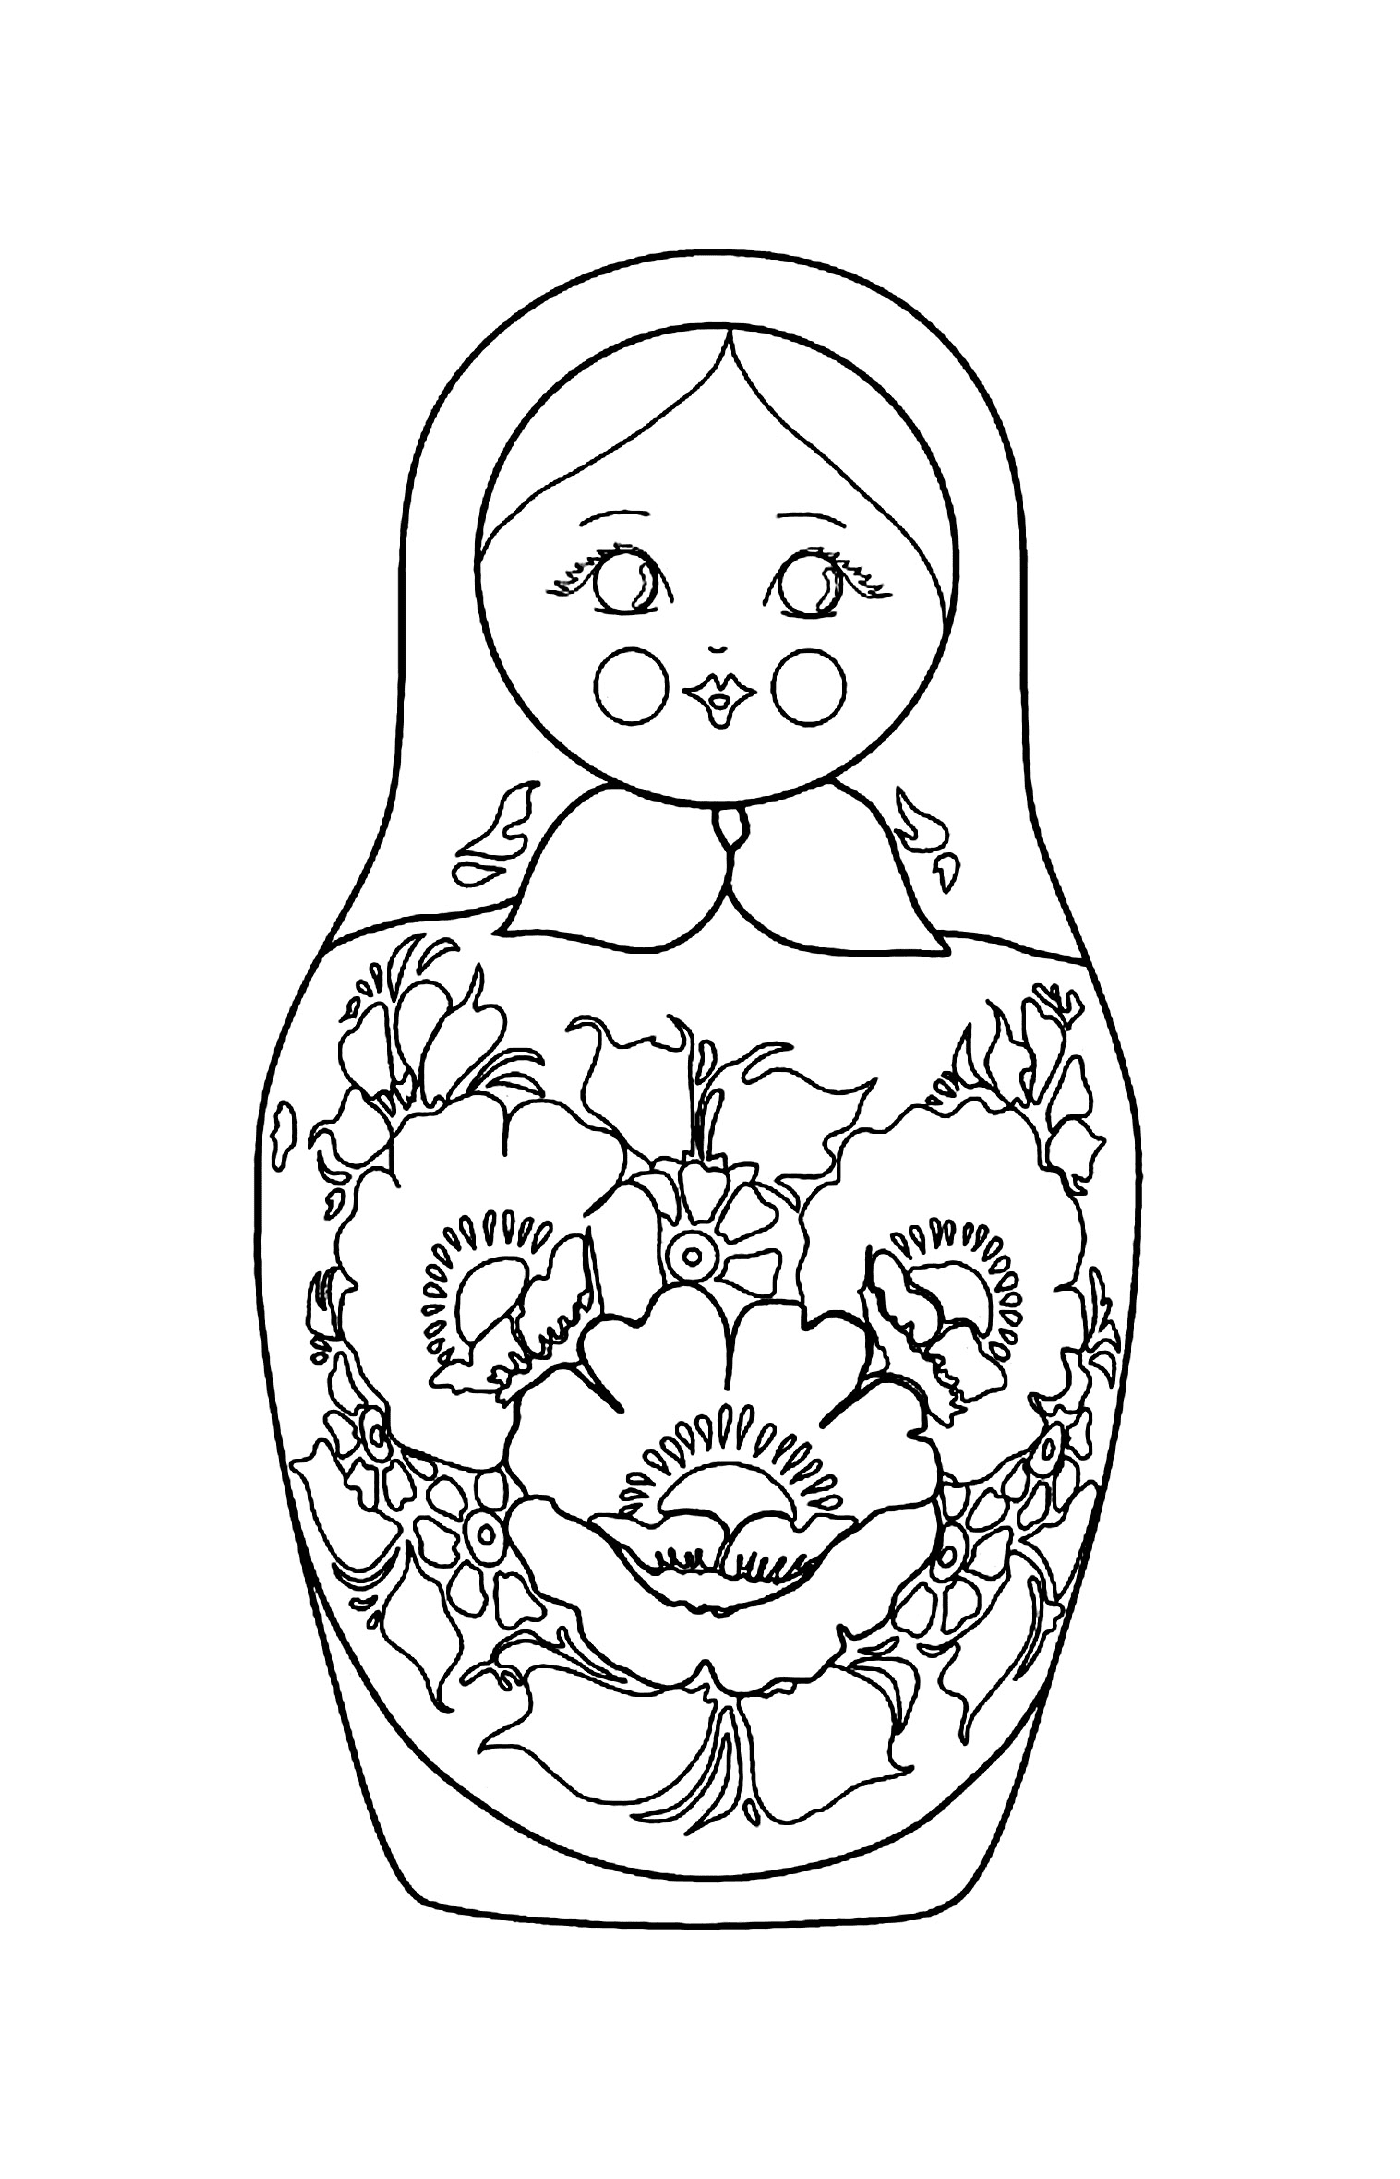  Russian doll colored flowers 